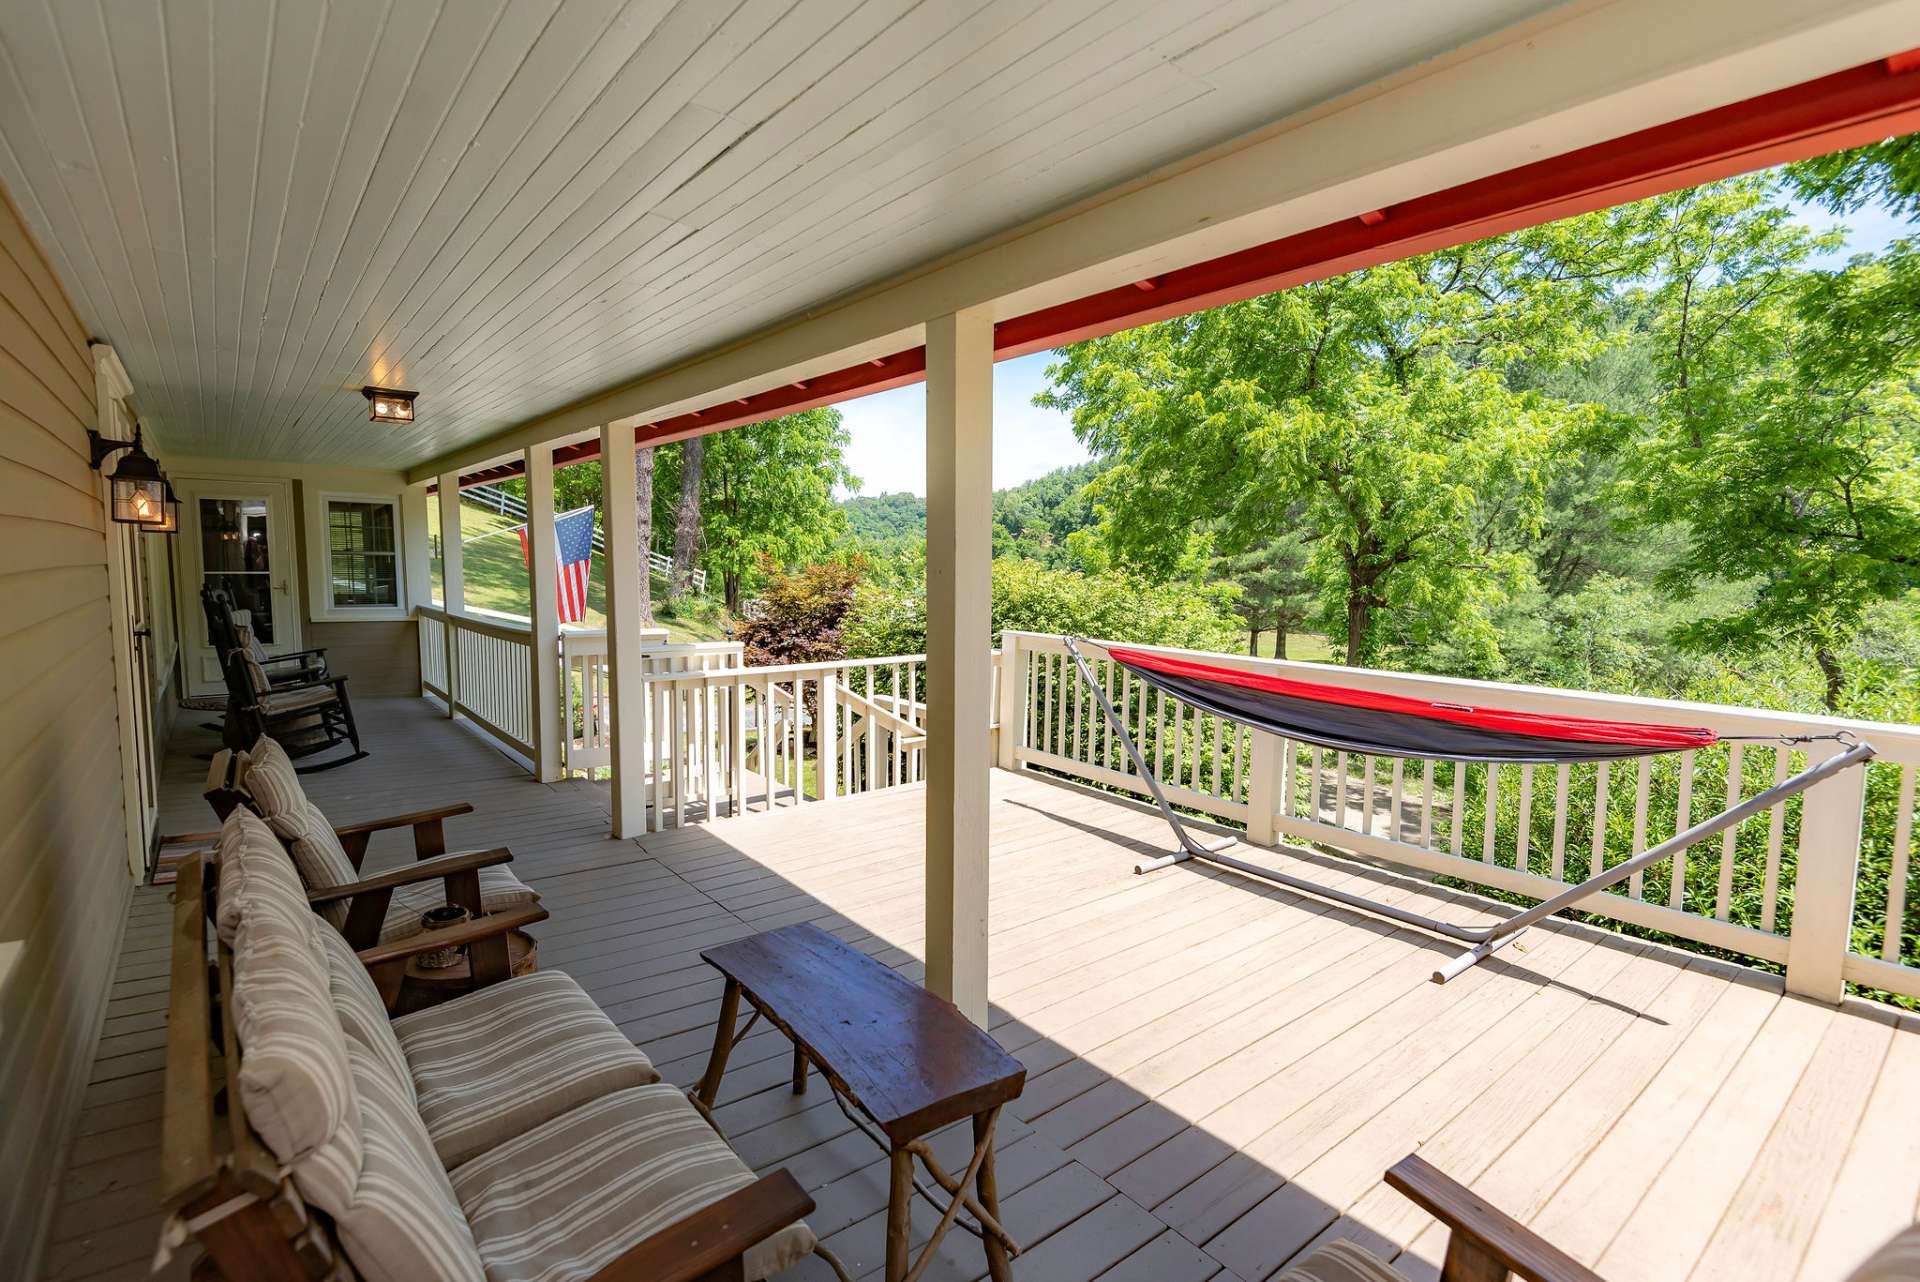 The partially covered front porch offers a relaxing space to enjoy a lazy summer afternoon, or outdoor entertaining.